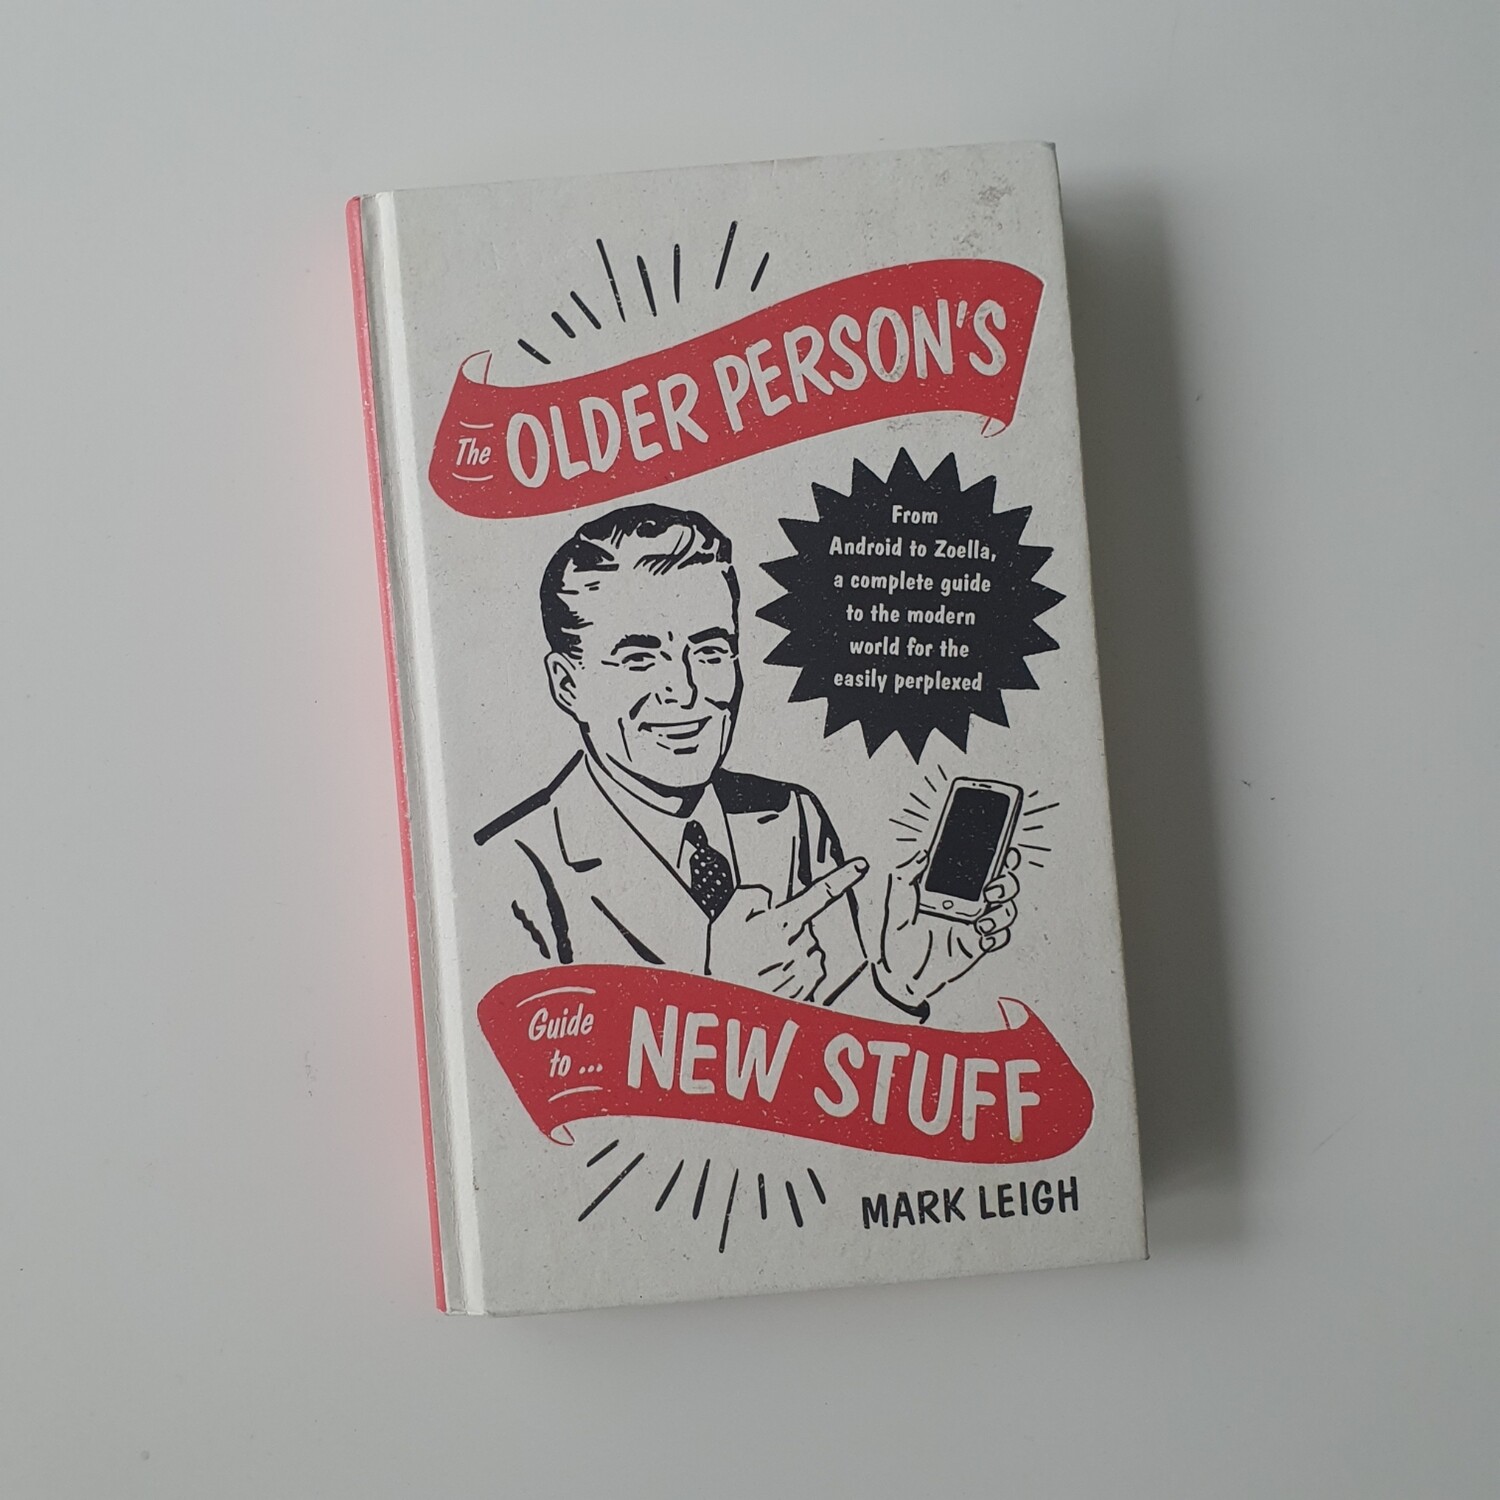 The Older Person's Guide to New Stuff